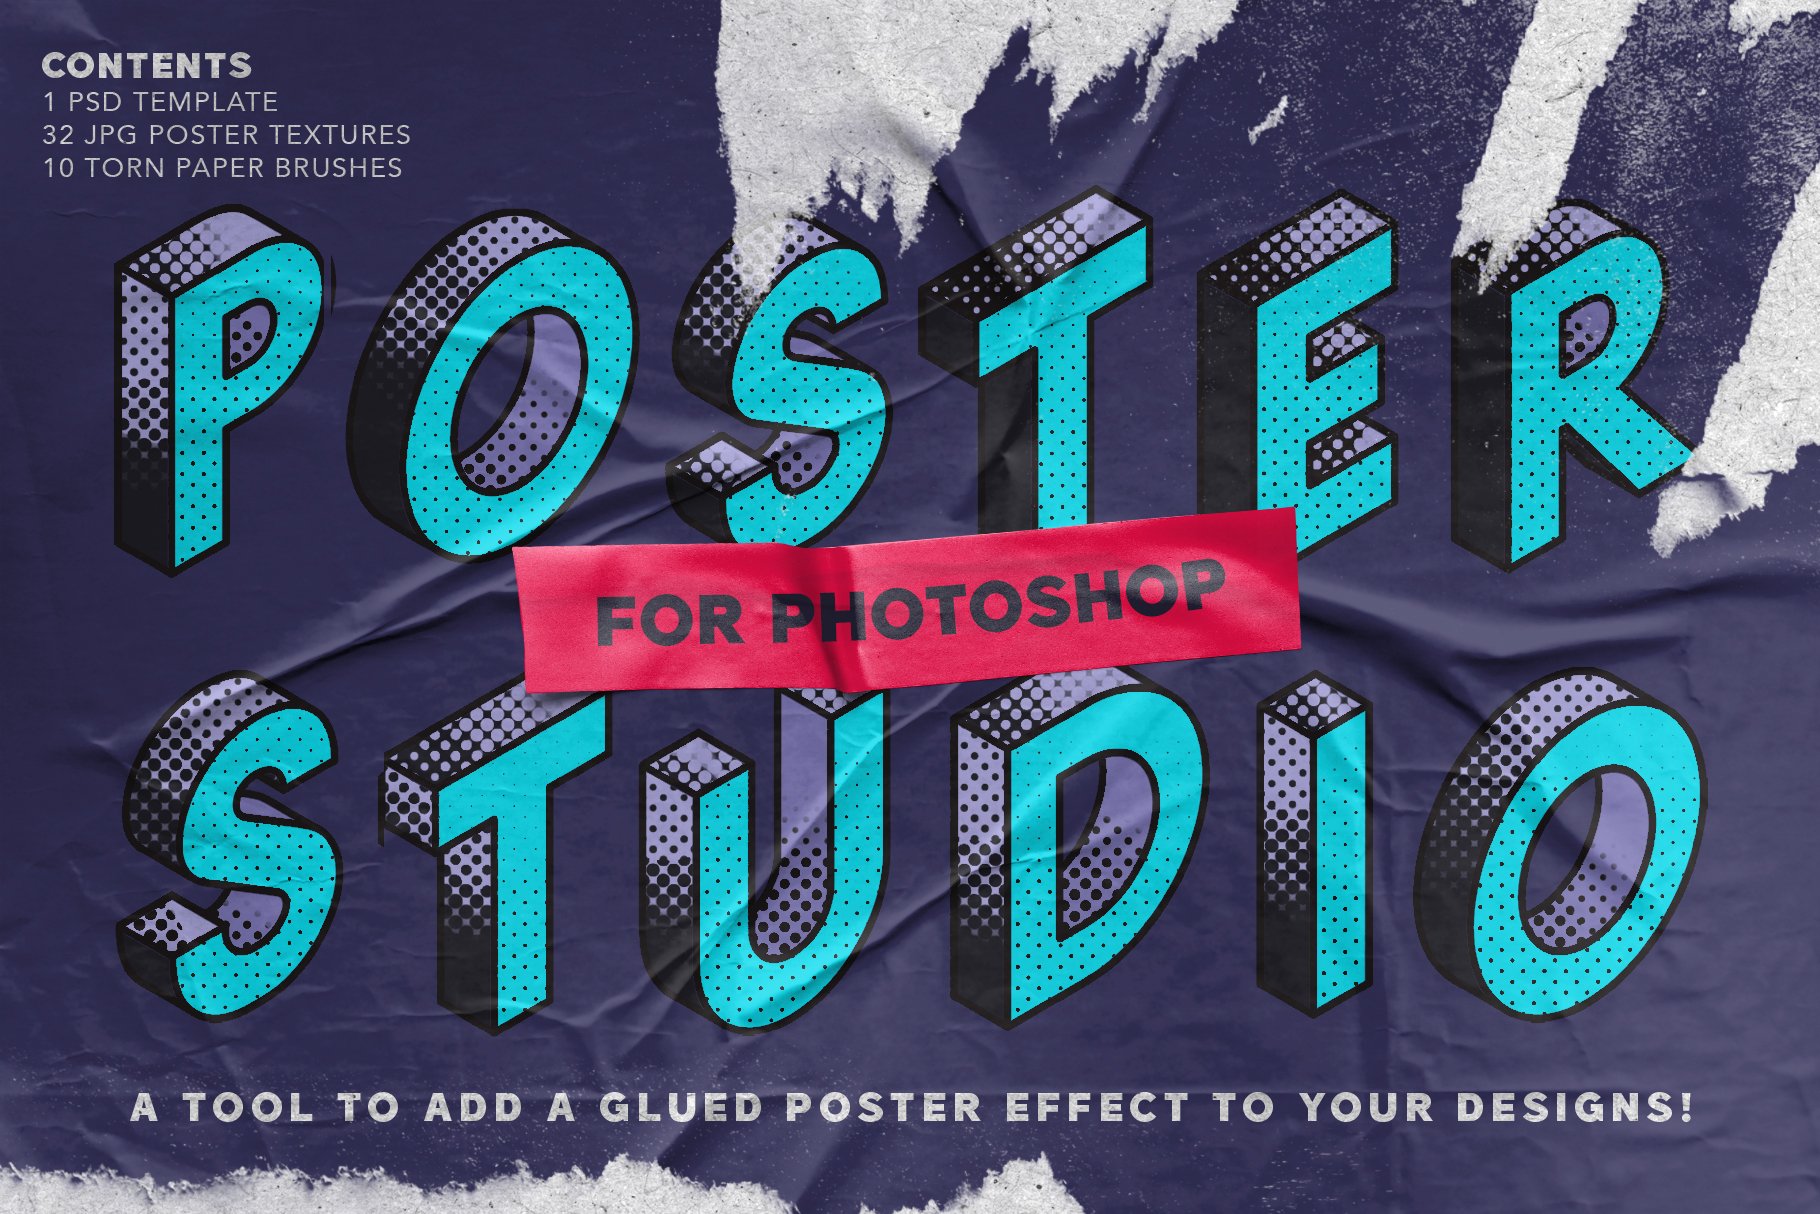 Poster Studio for Photoshopcover image.